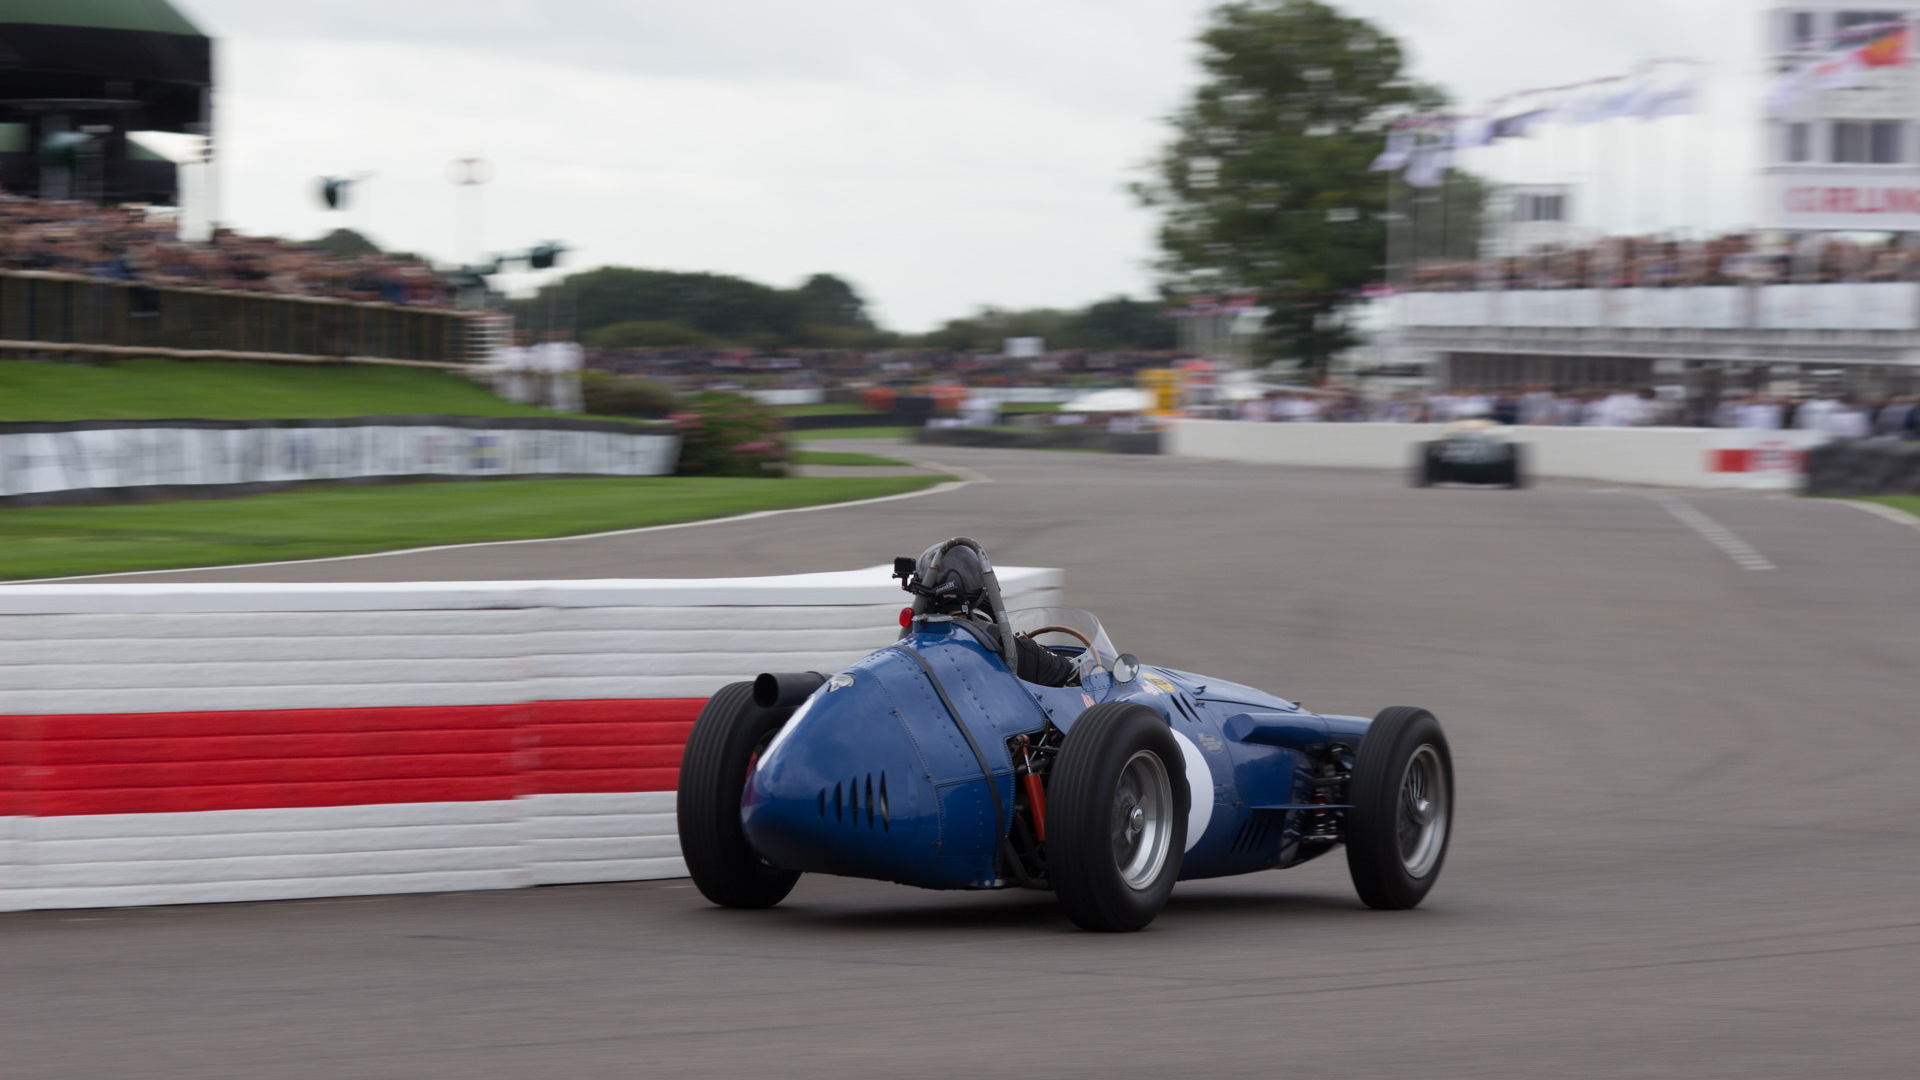 2017 Goodwood Revival Day 2